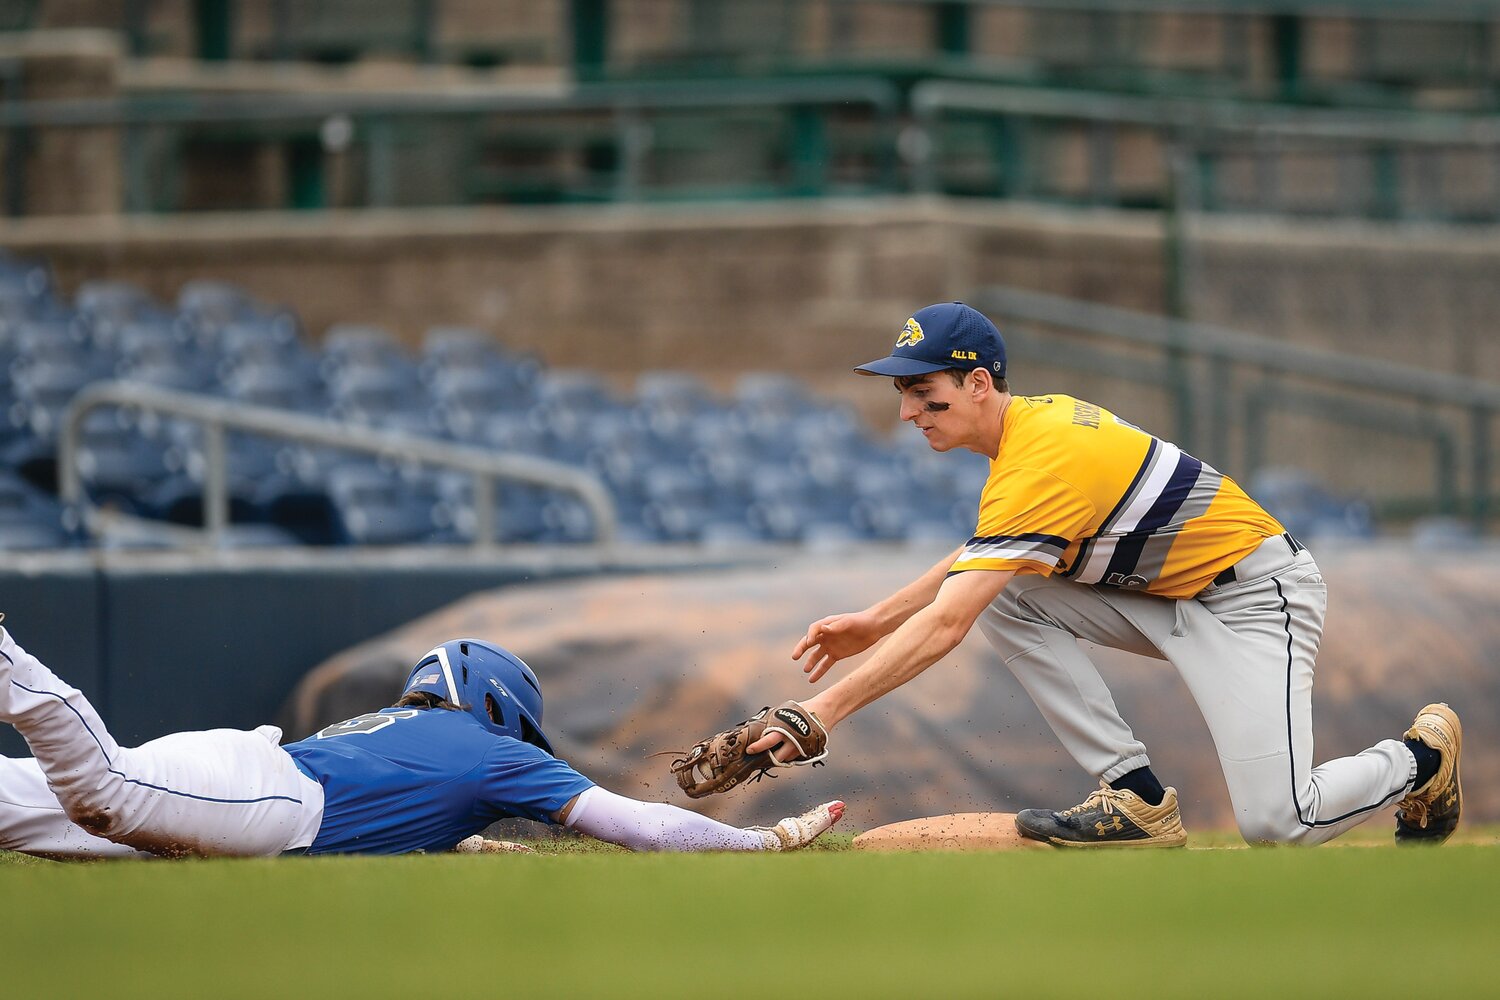 New Hope-Solebury shortstop Nate Wiseman, covering the bag at third, tags out South Hunterdon pinch runner Anthony Venettone, who over ran the bag in the first inning.